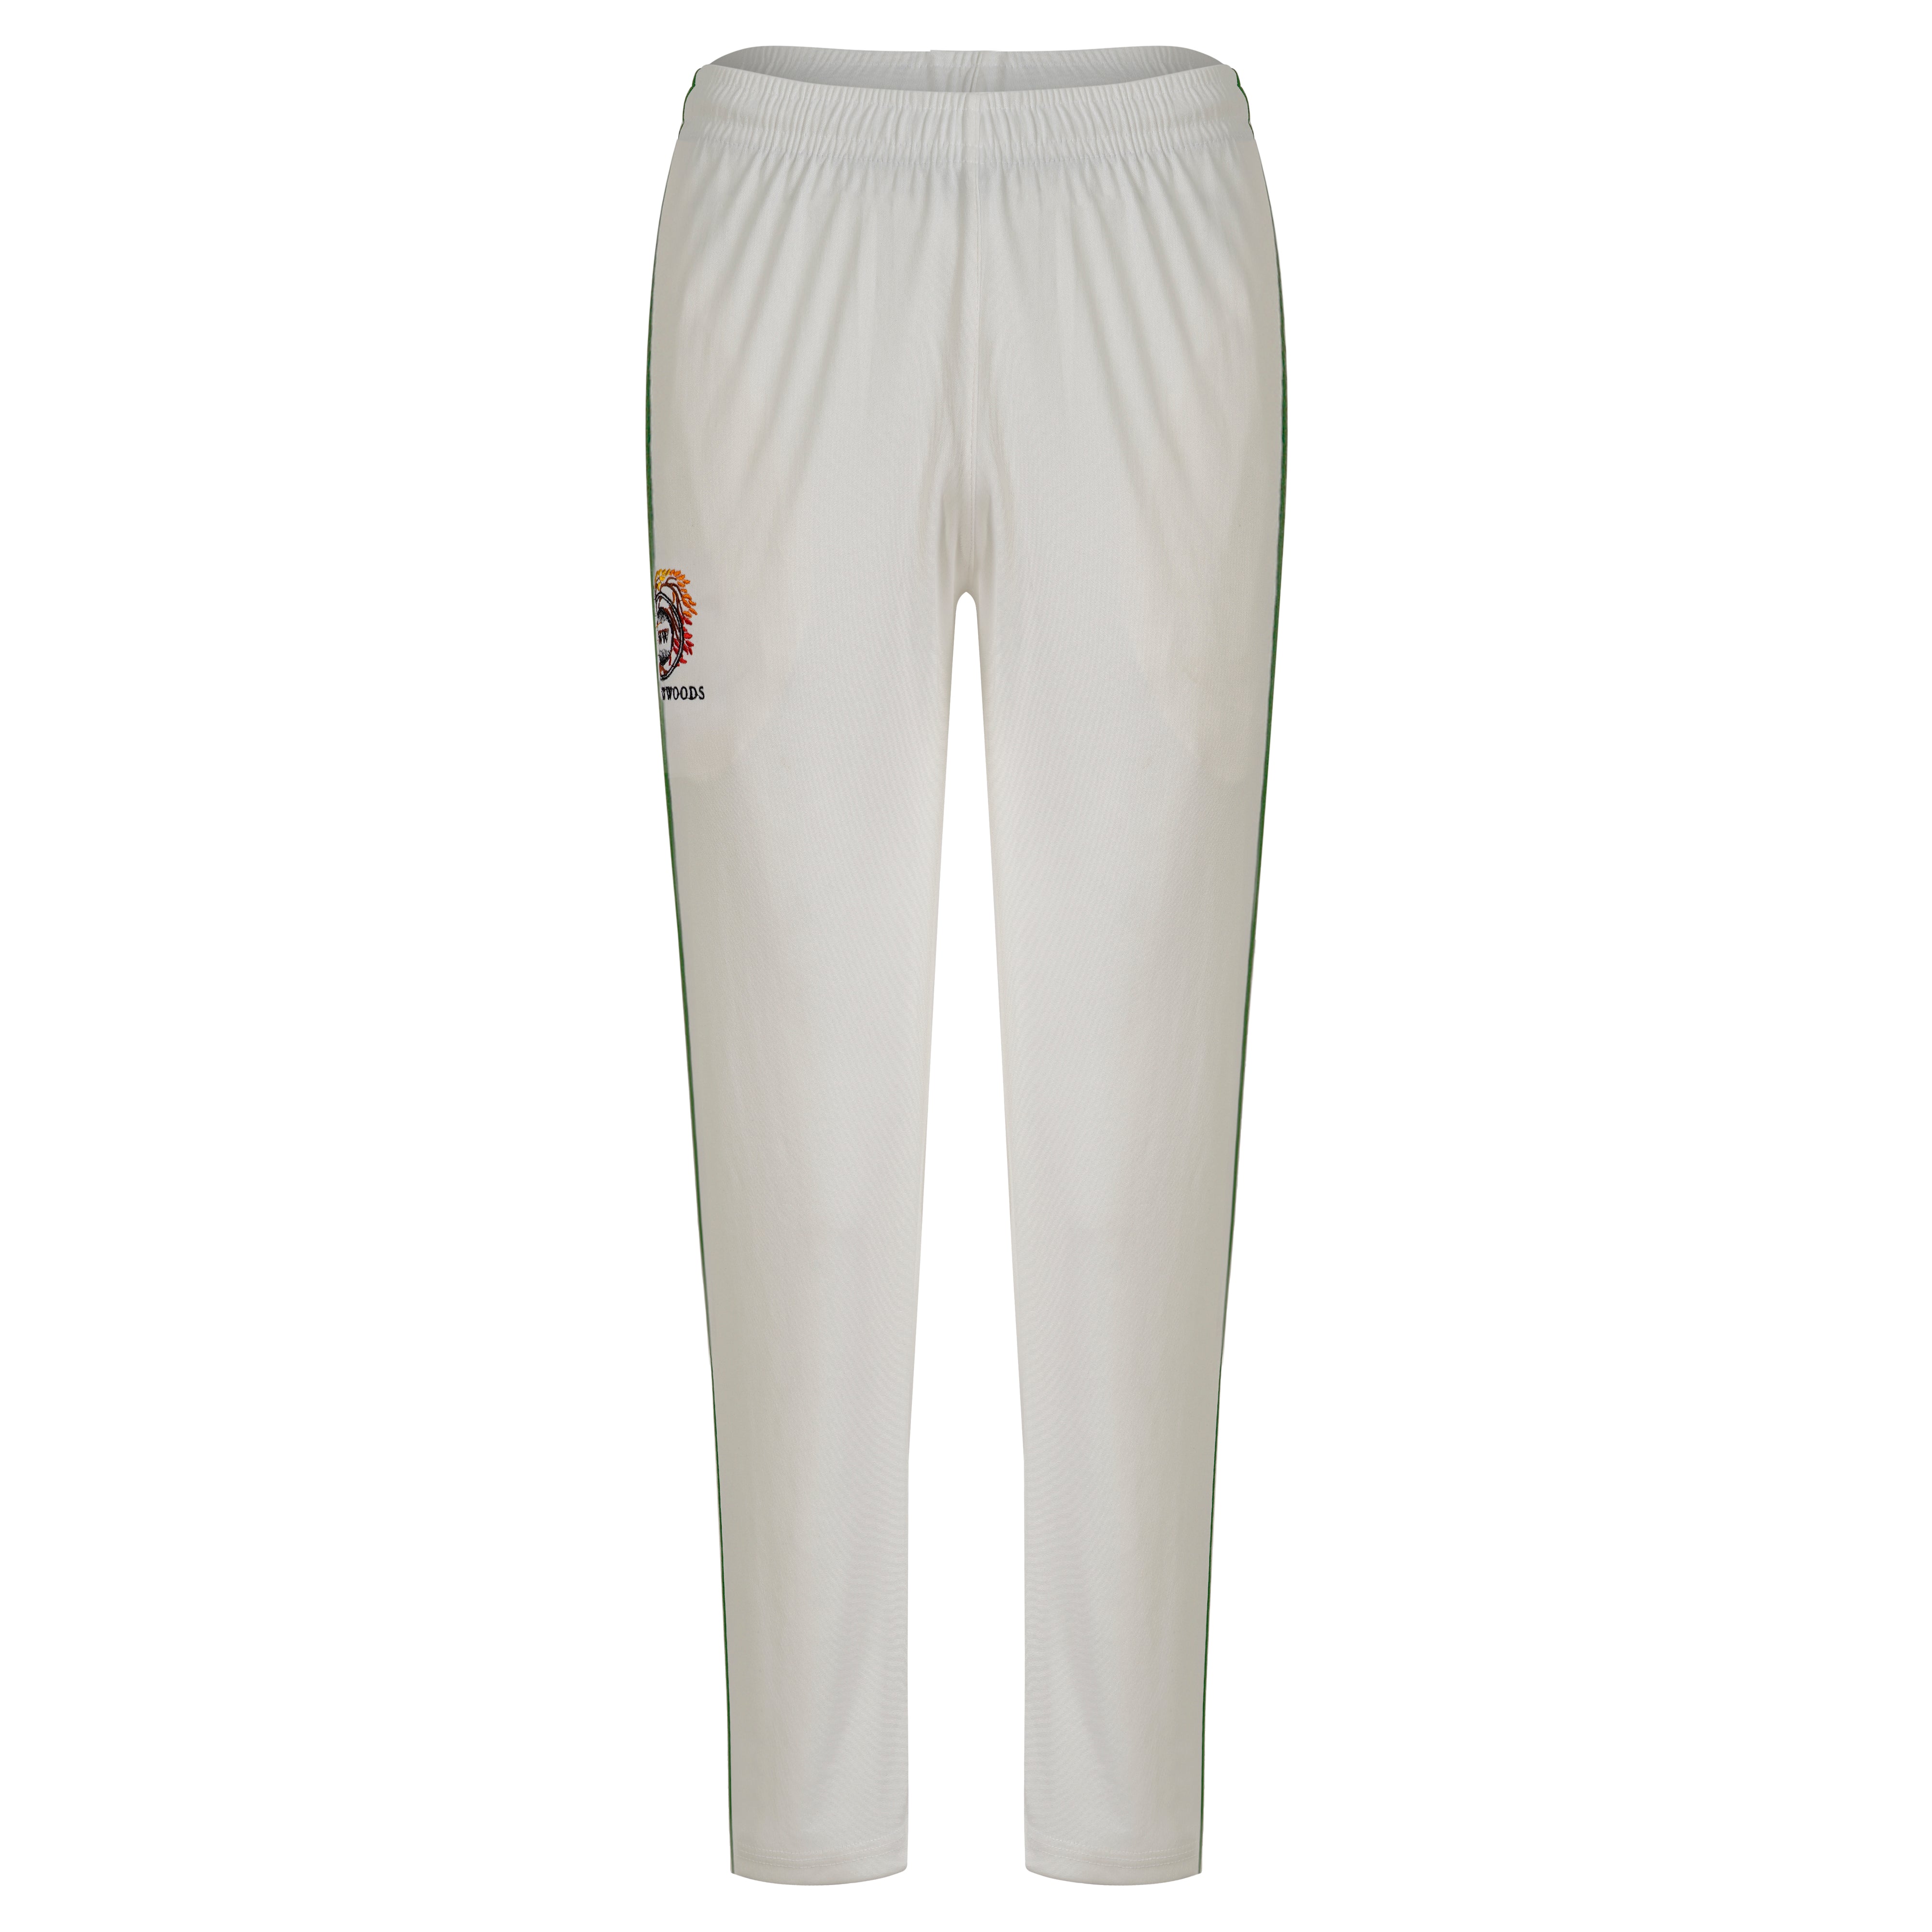 Pro cricket trousers